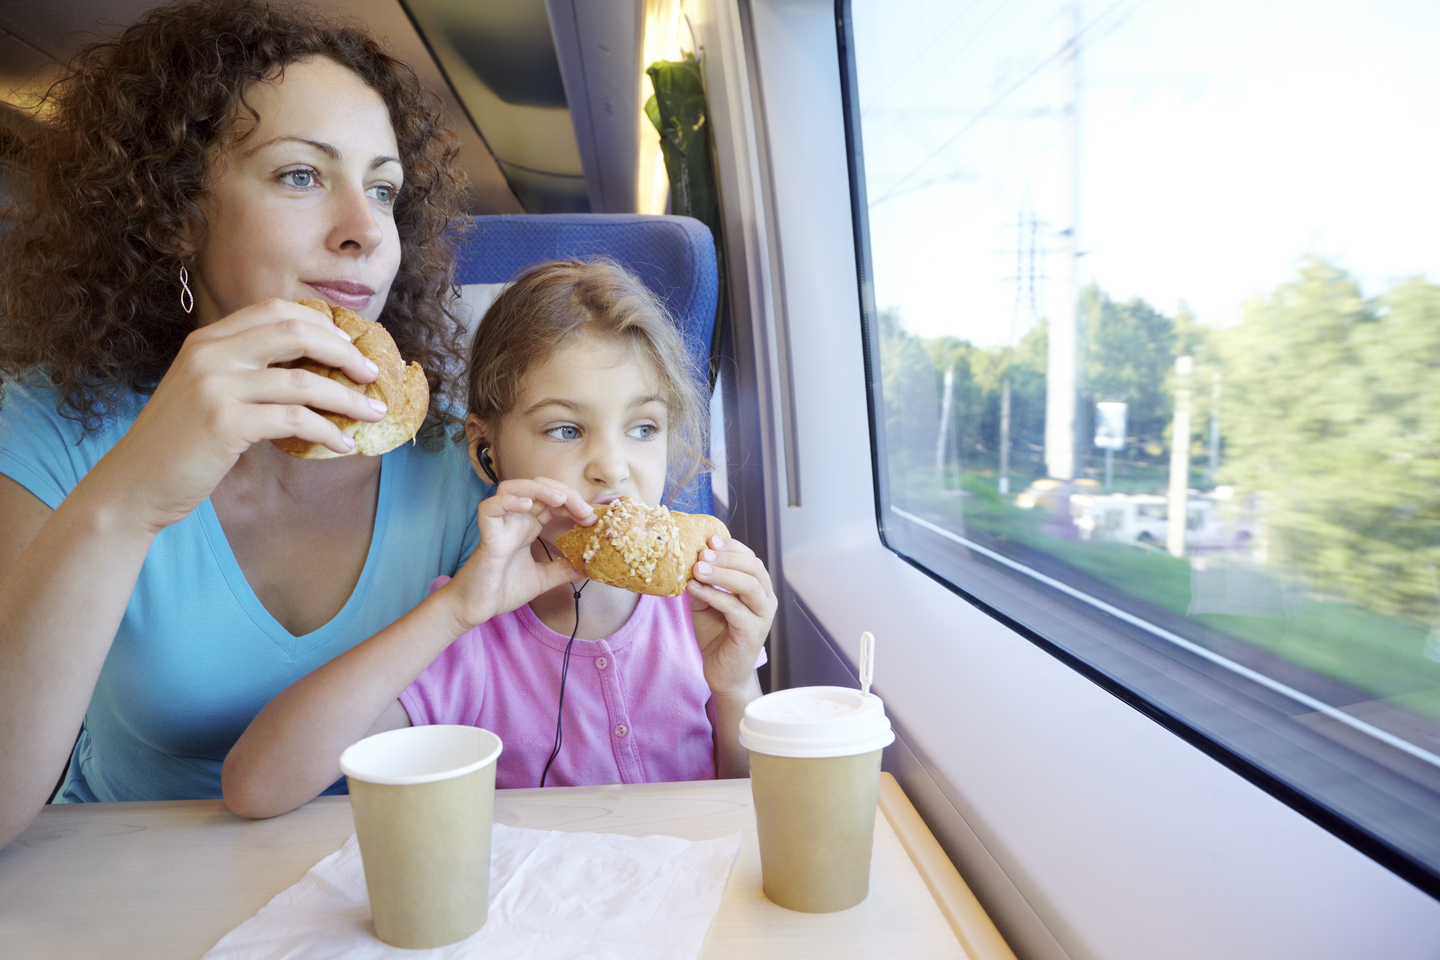 Mother and daughter eat and drink, sitting in armchair at table near window of moving speed train